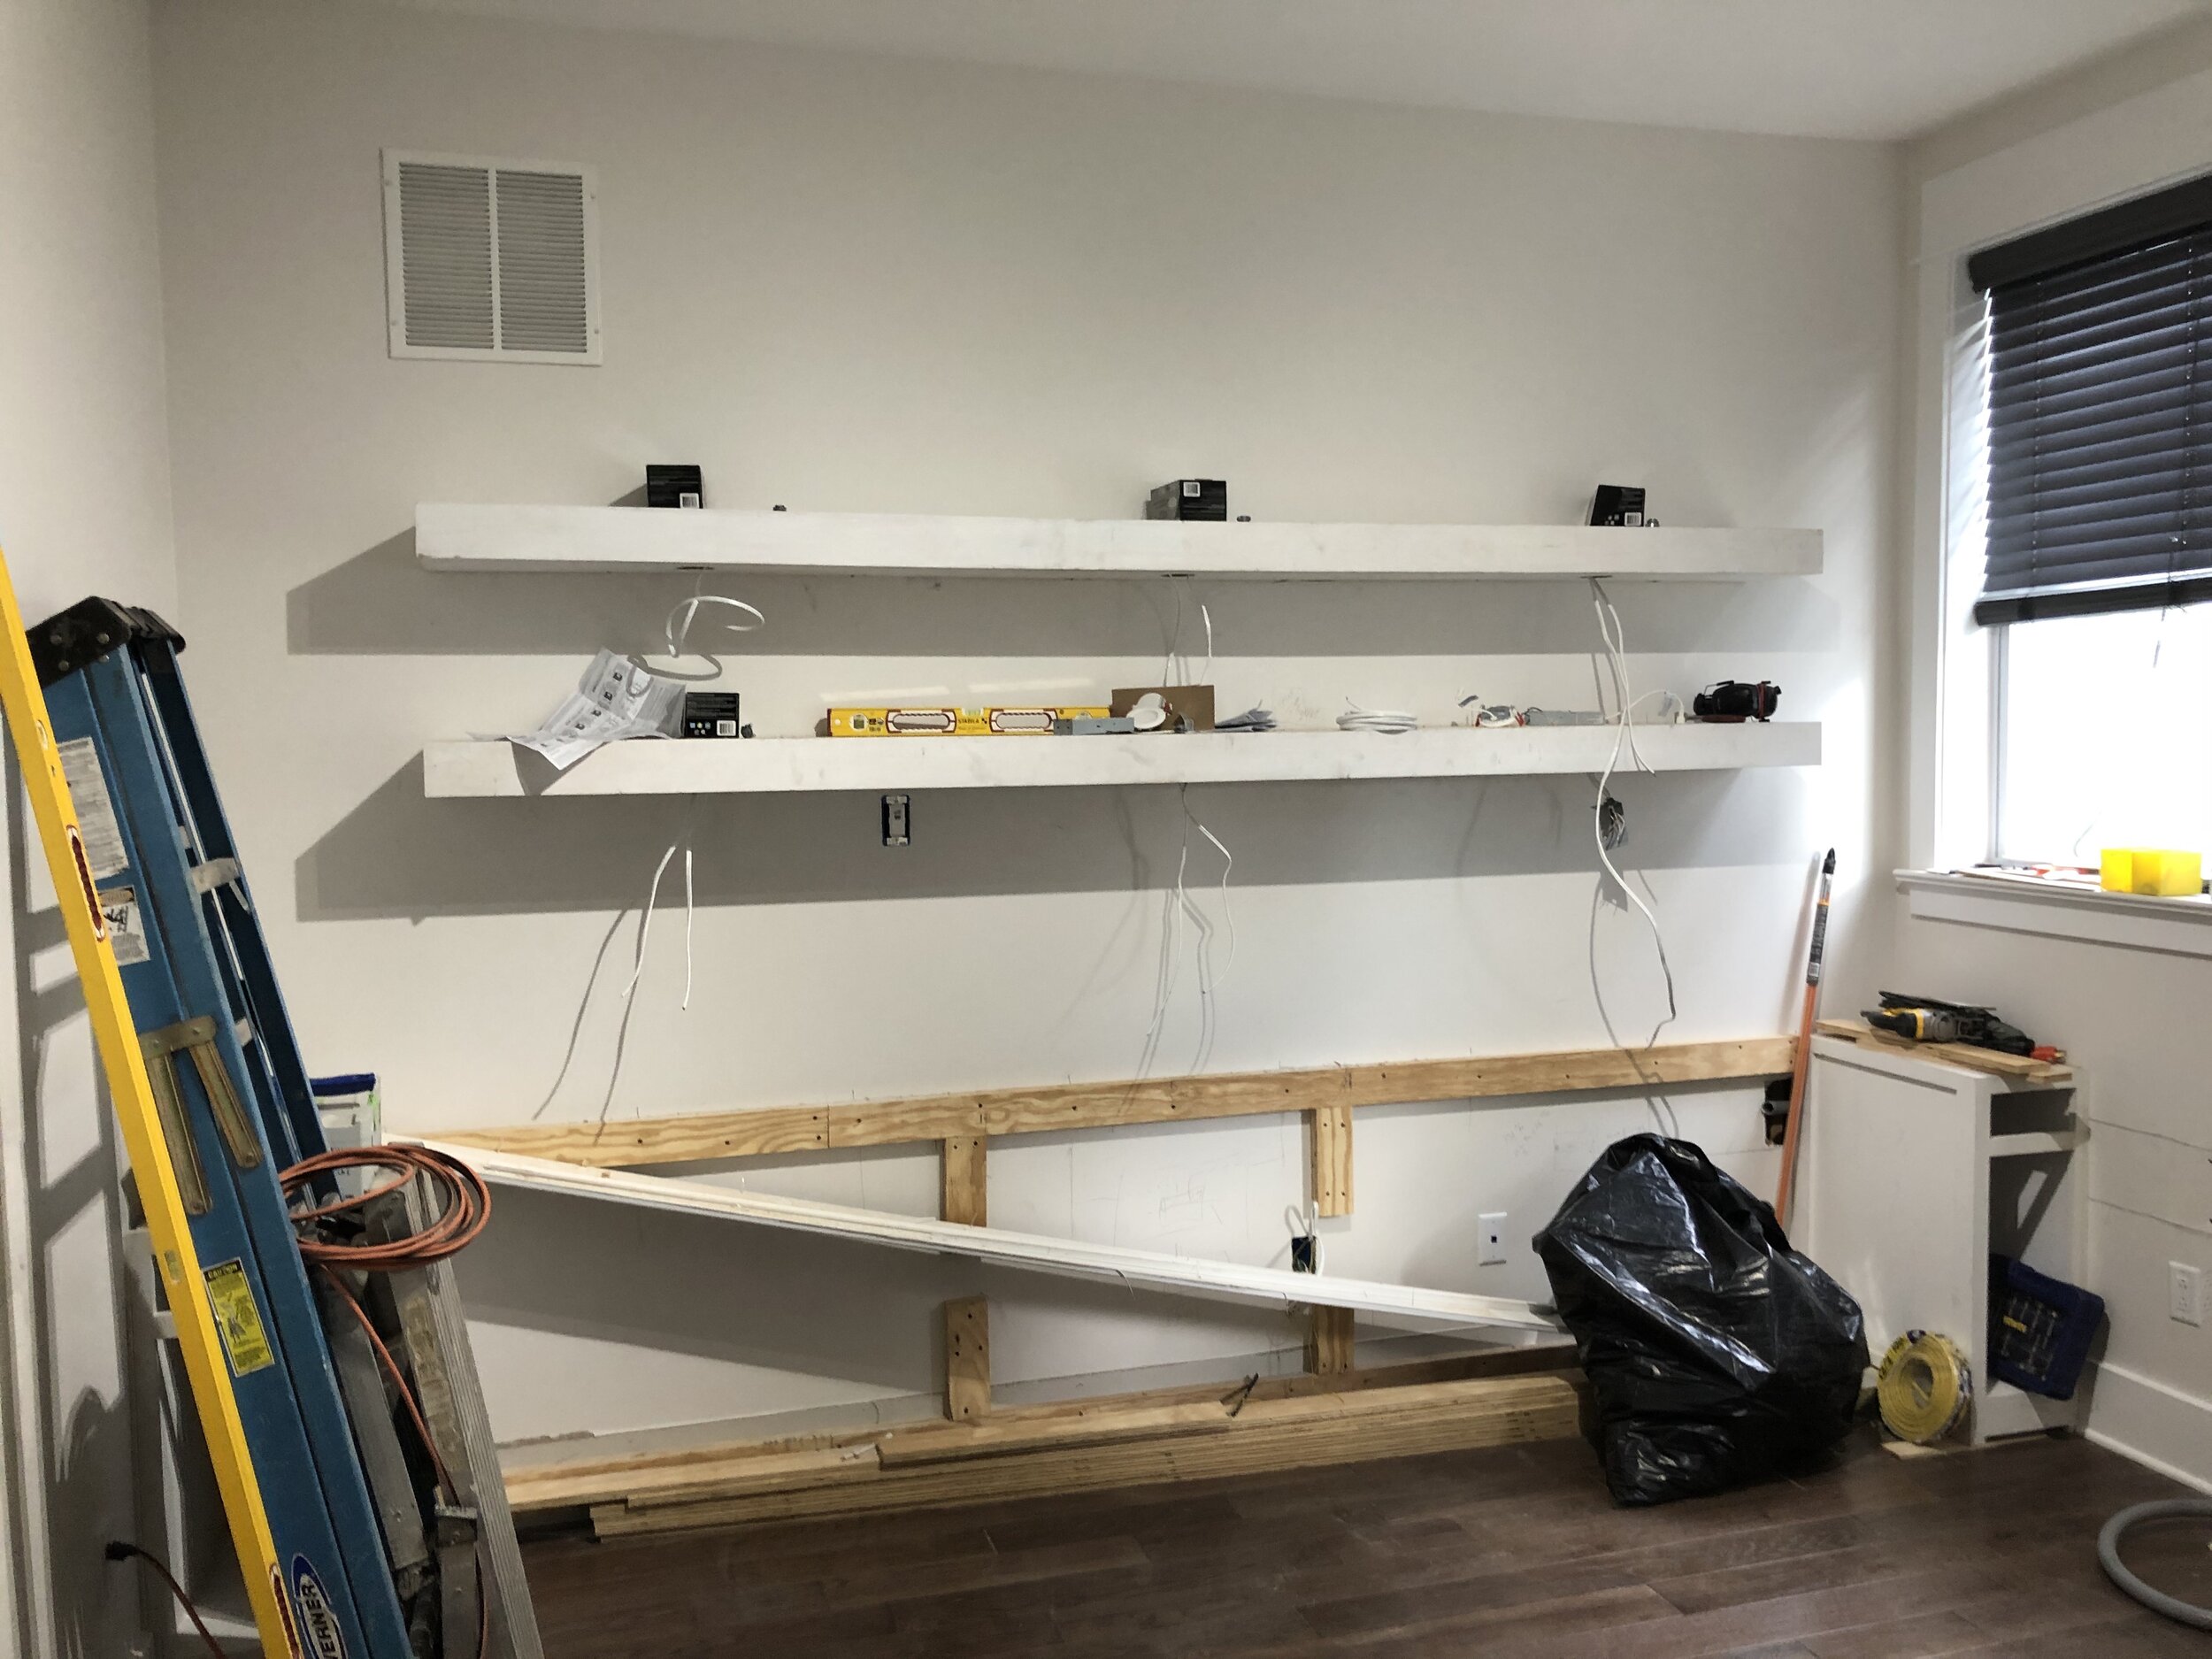  The design called for floating shelves above the desk with built-in lights, and three lower cabinets at the ends of the desktop to allow for maximum leg-room underneath. Here you can see the lower cabinets on the far right and (somewhat obscured by 